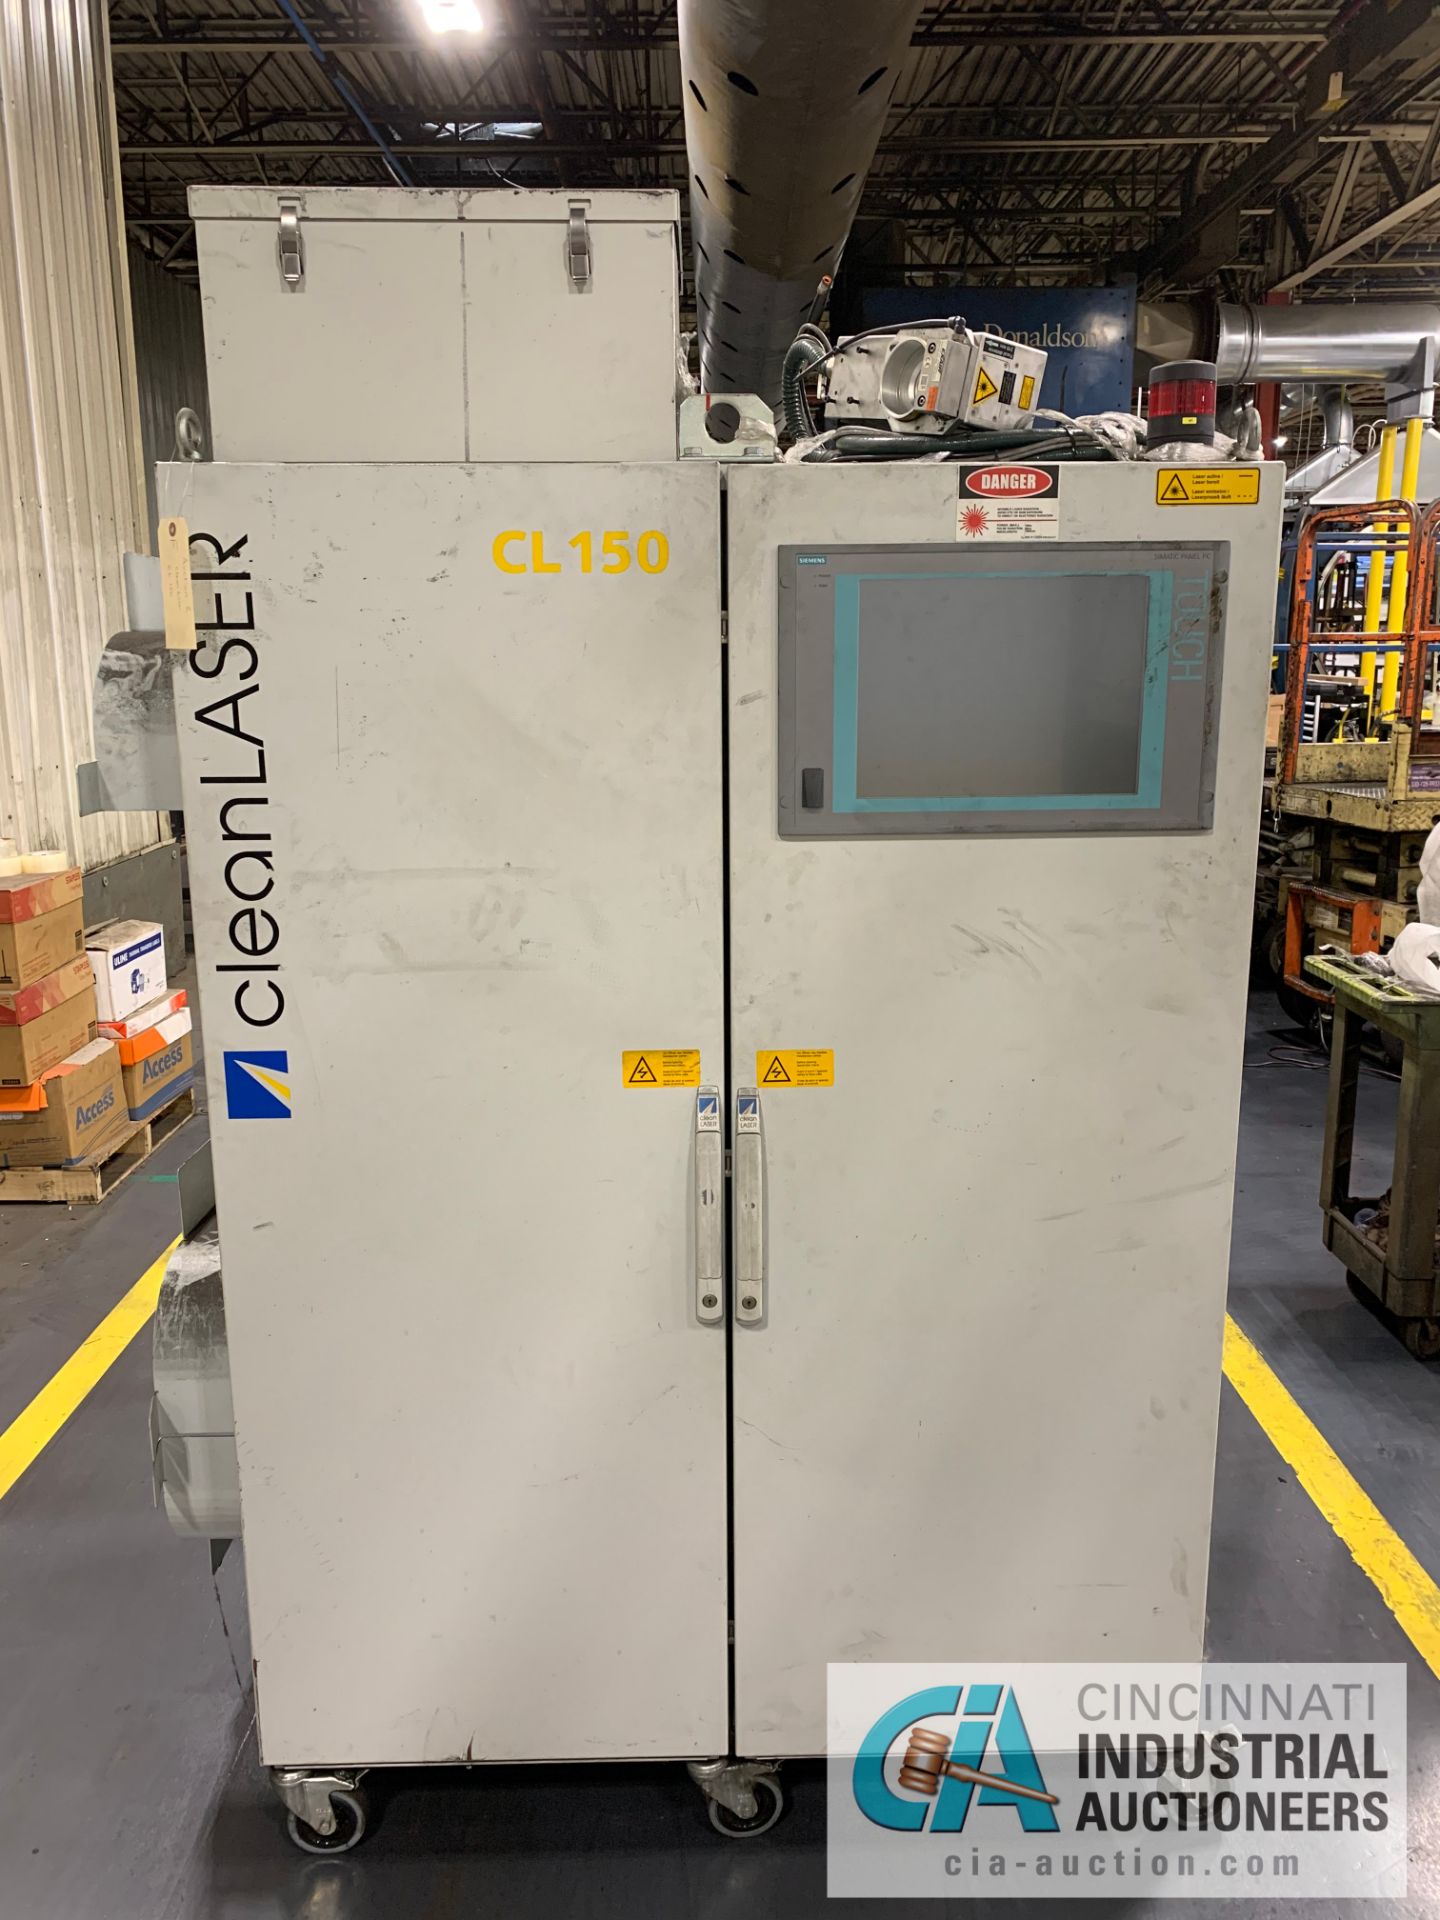 150 WATT CLEANLASER CL-150 CNC COMPACT CLEANING LASER; S/N L15-1600 (2015) SIEMENS SIMATIC PANEL